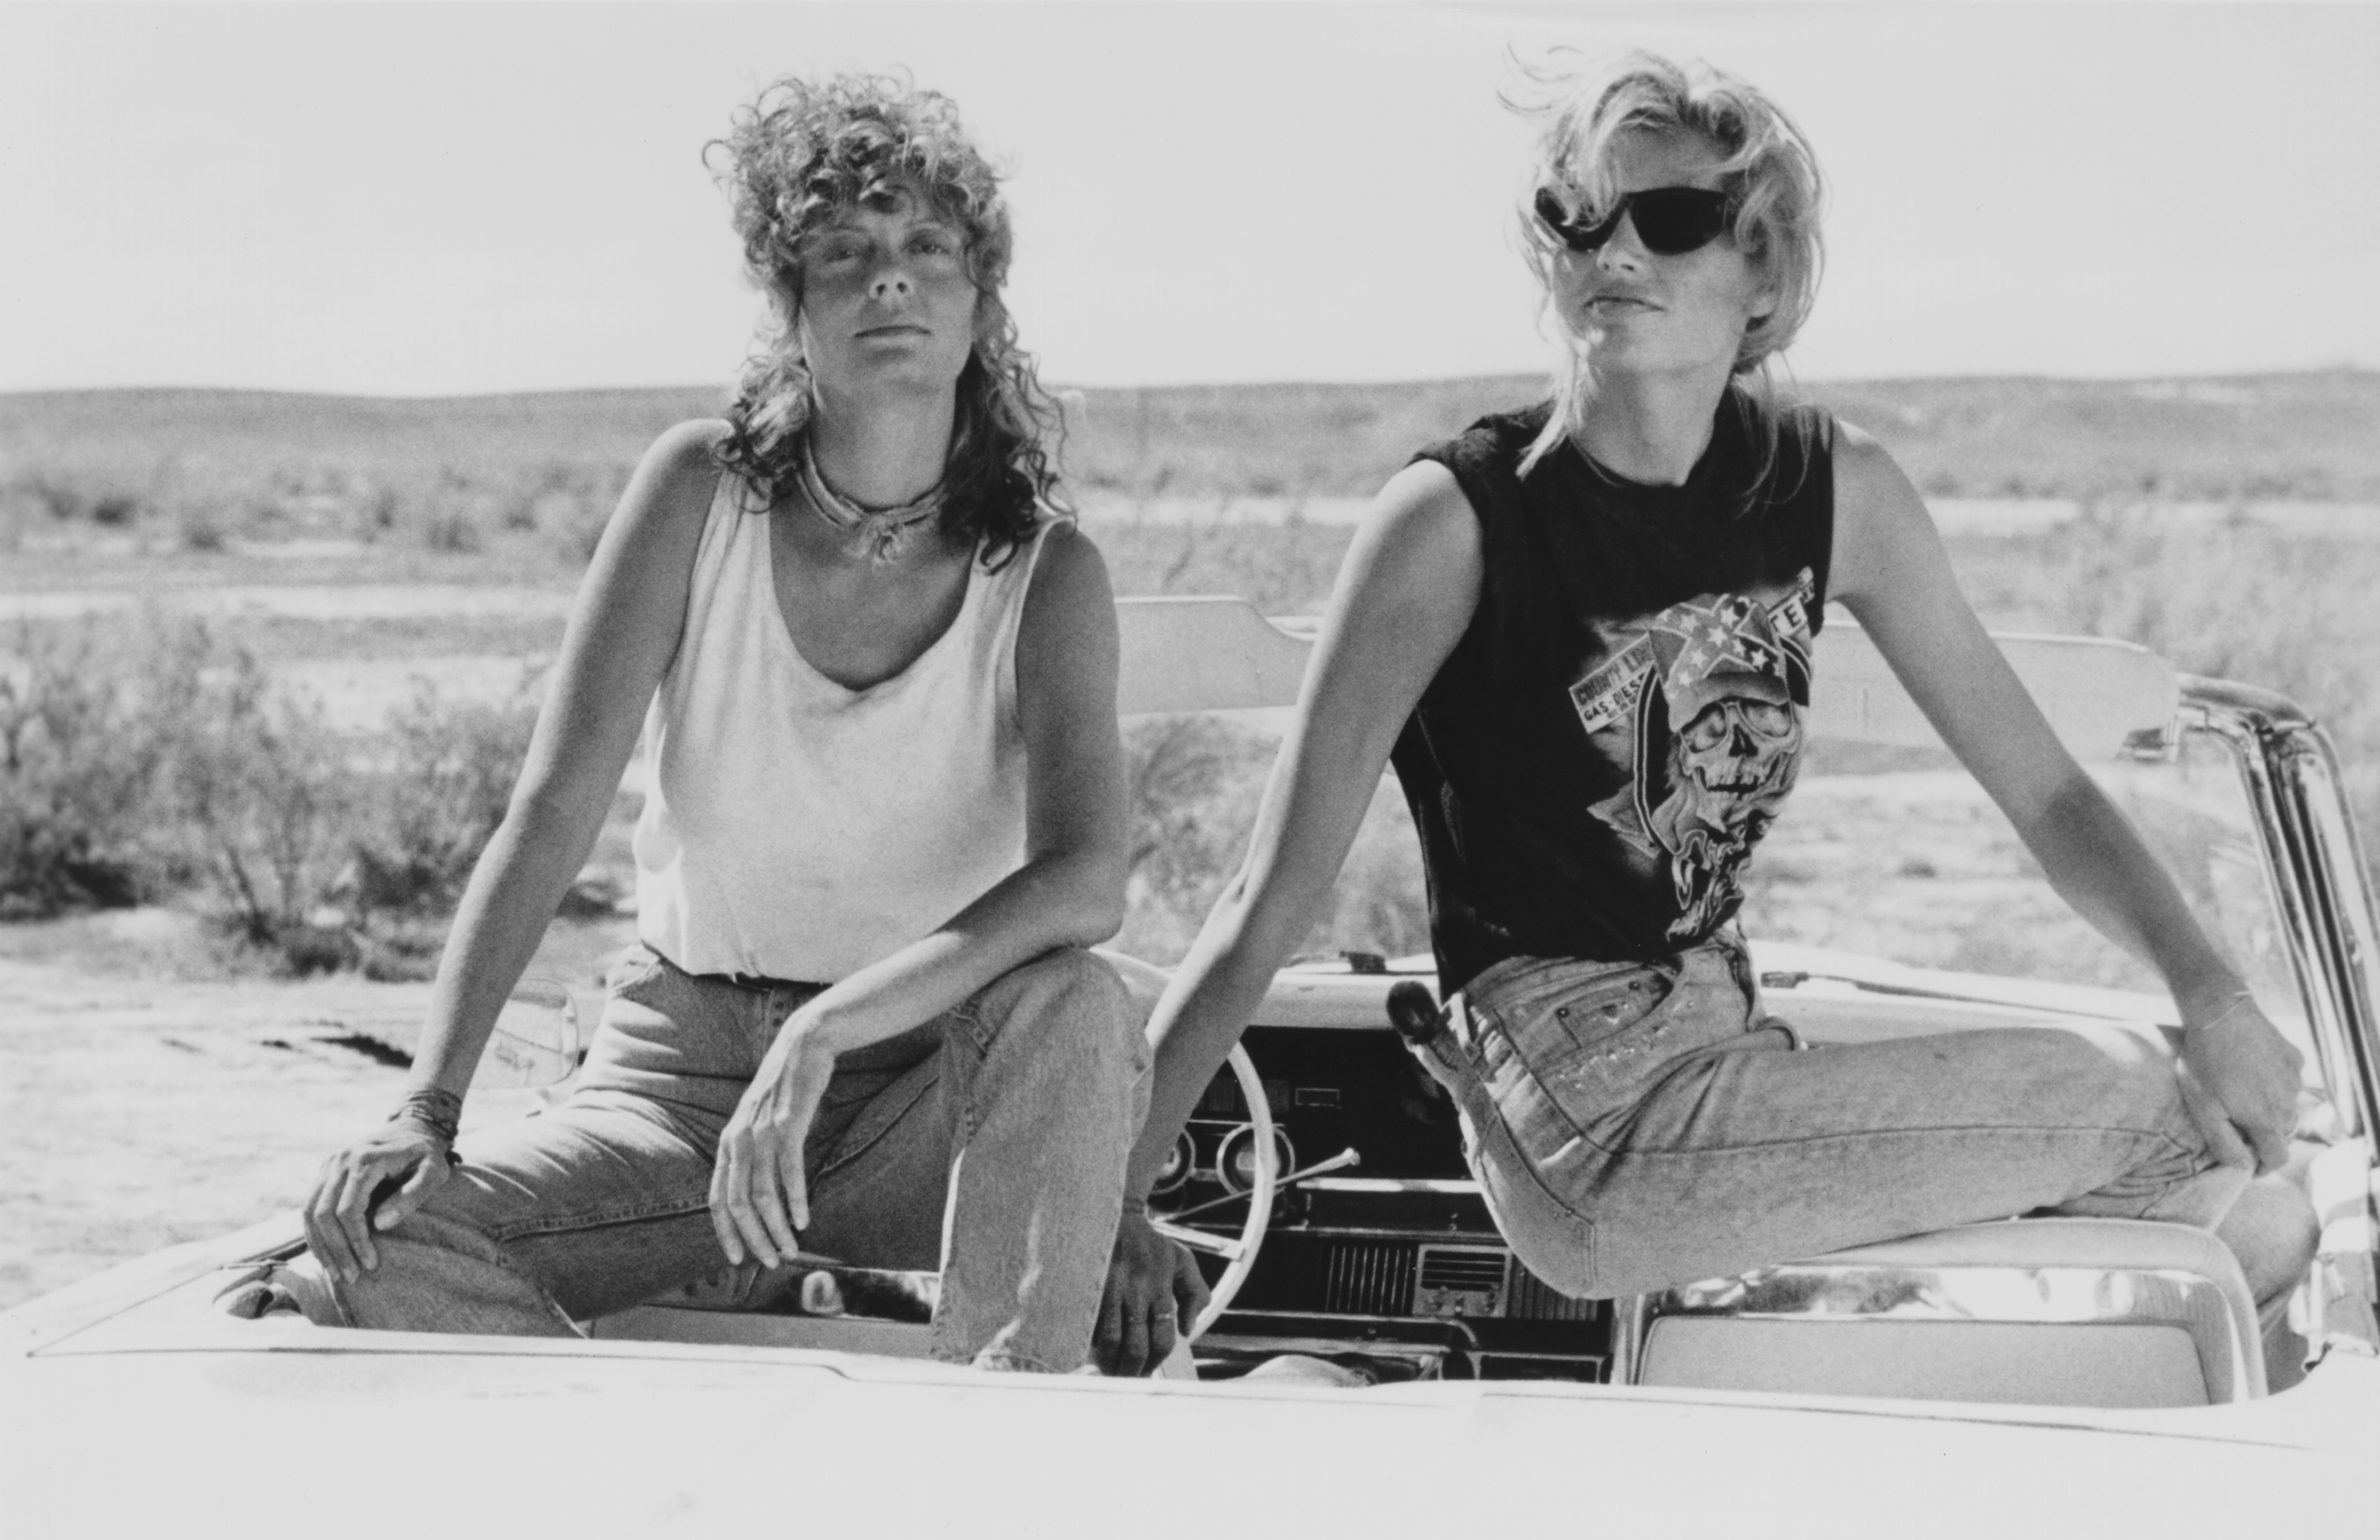 Actresses Susan Sarandon (left) and Geena Davis star in the film 'Thelma And Louise', 1991. (Photo by MGM Studios/Getty Images)